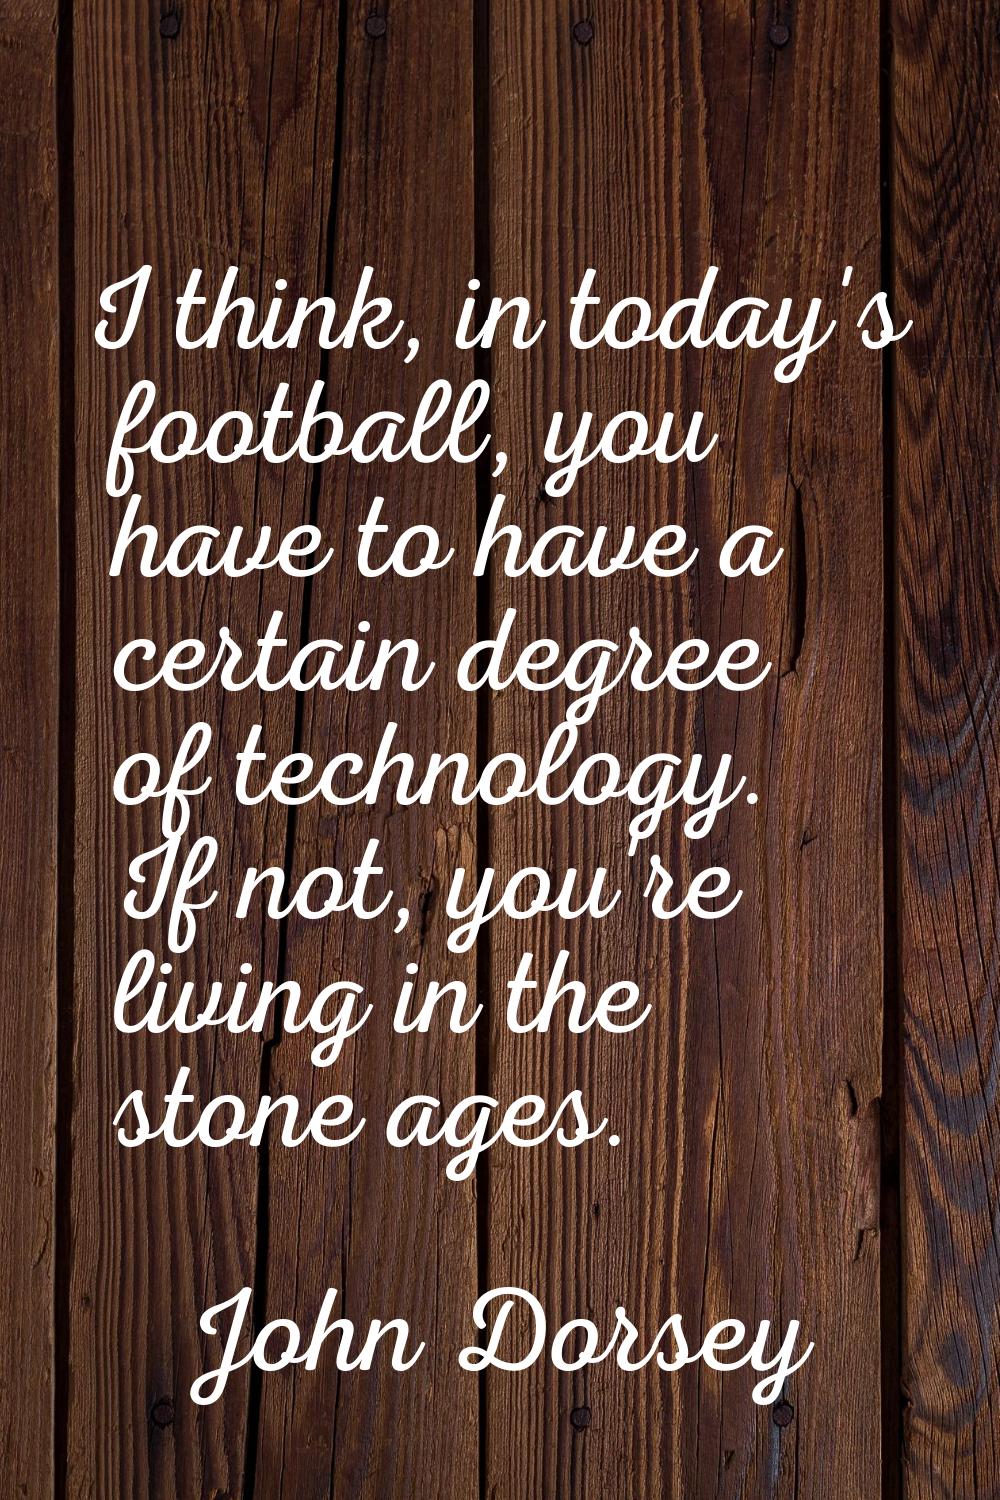 I think, in today's football, you have to have a certain degree of technology. If not, you're livin